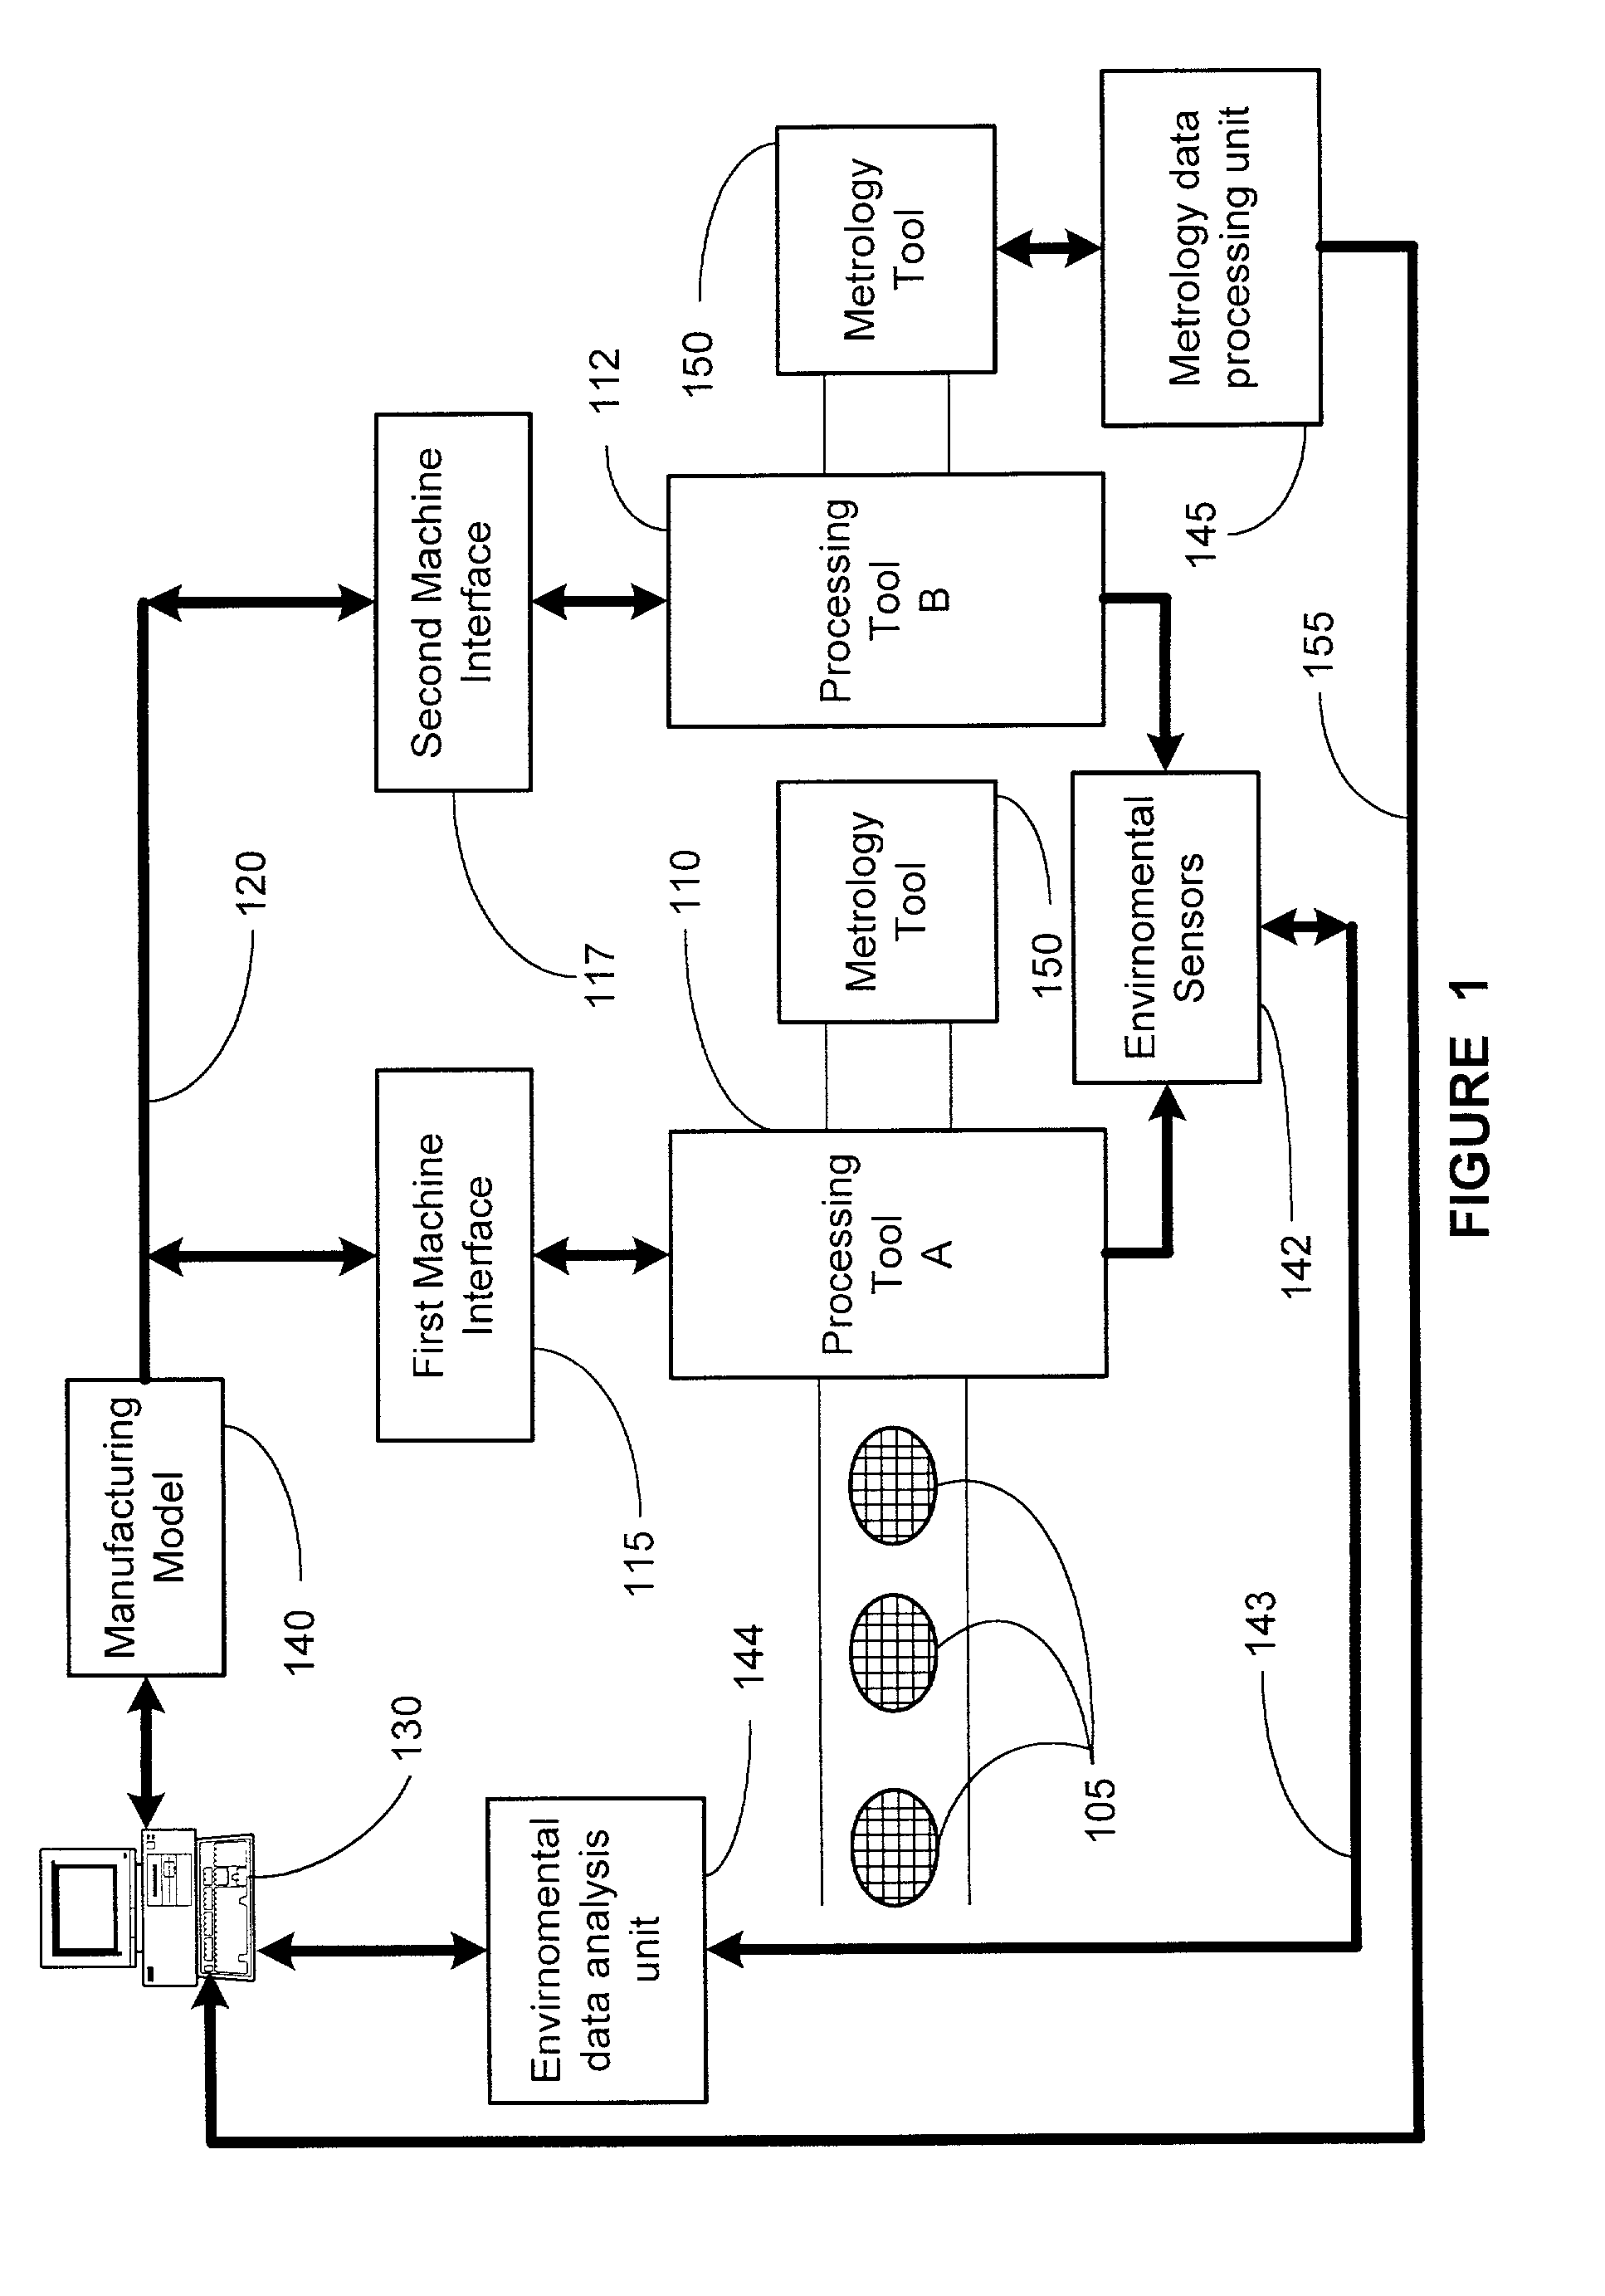 Method and apparatus for control of semiconductor processing for reducing effects of environmental effects